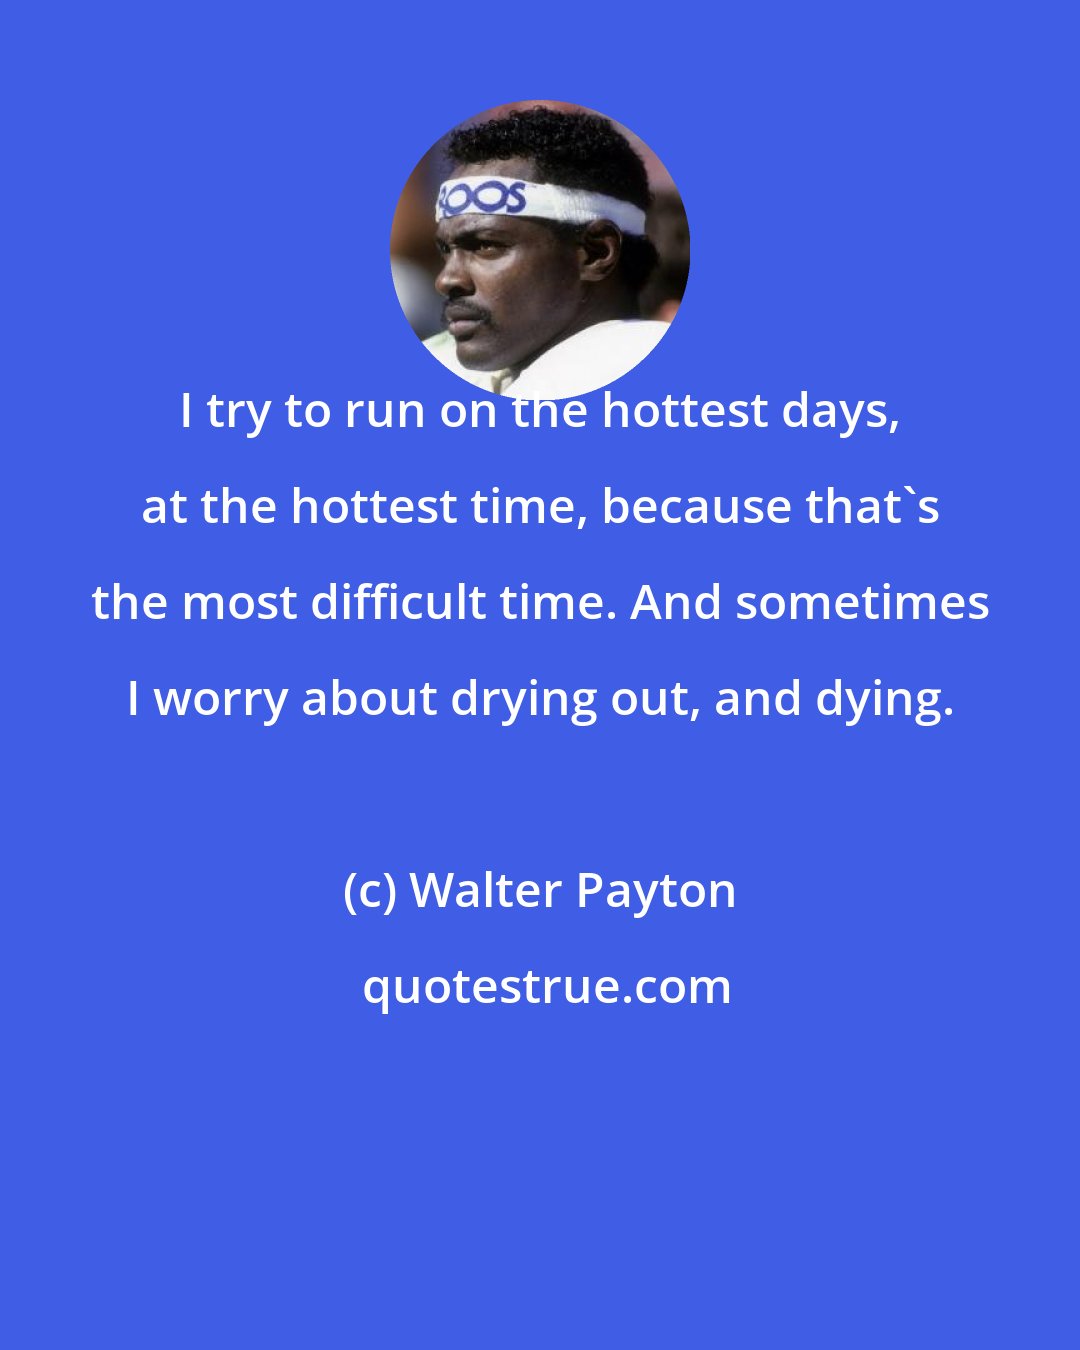 Walter Payton: I try to run on the hottest days, at the hottest time, because that's the most difficult time. And sometimes I worry about drying out, and dying.